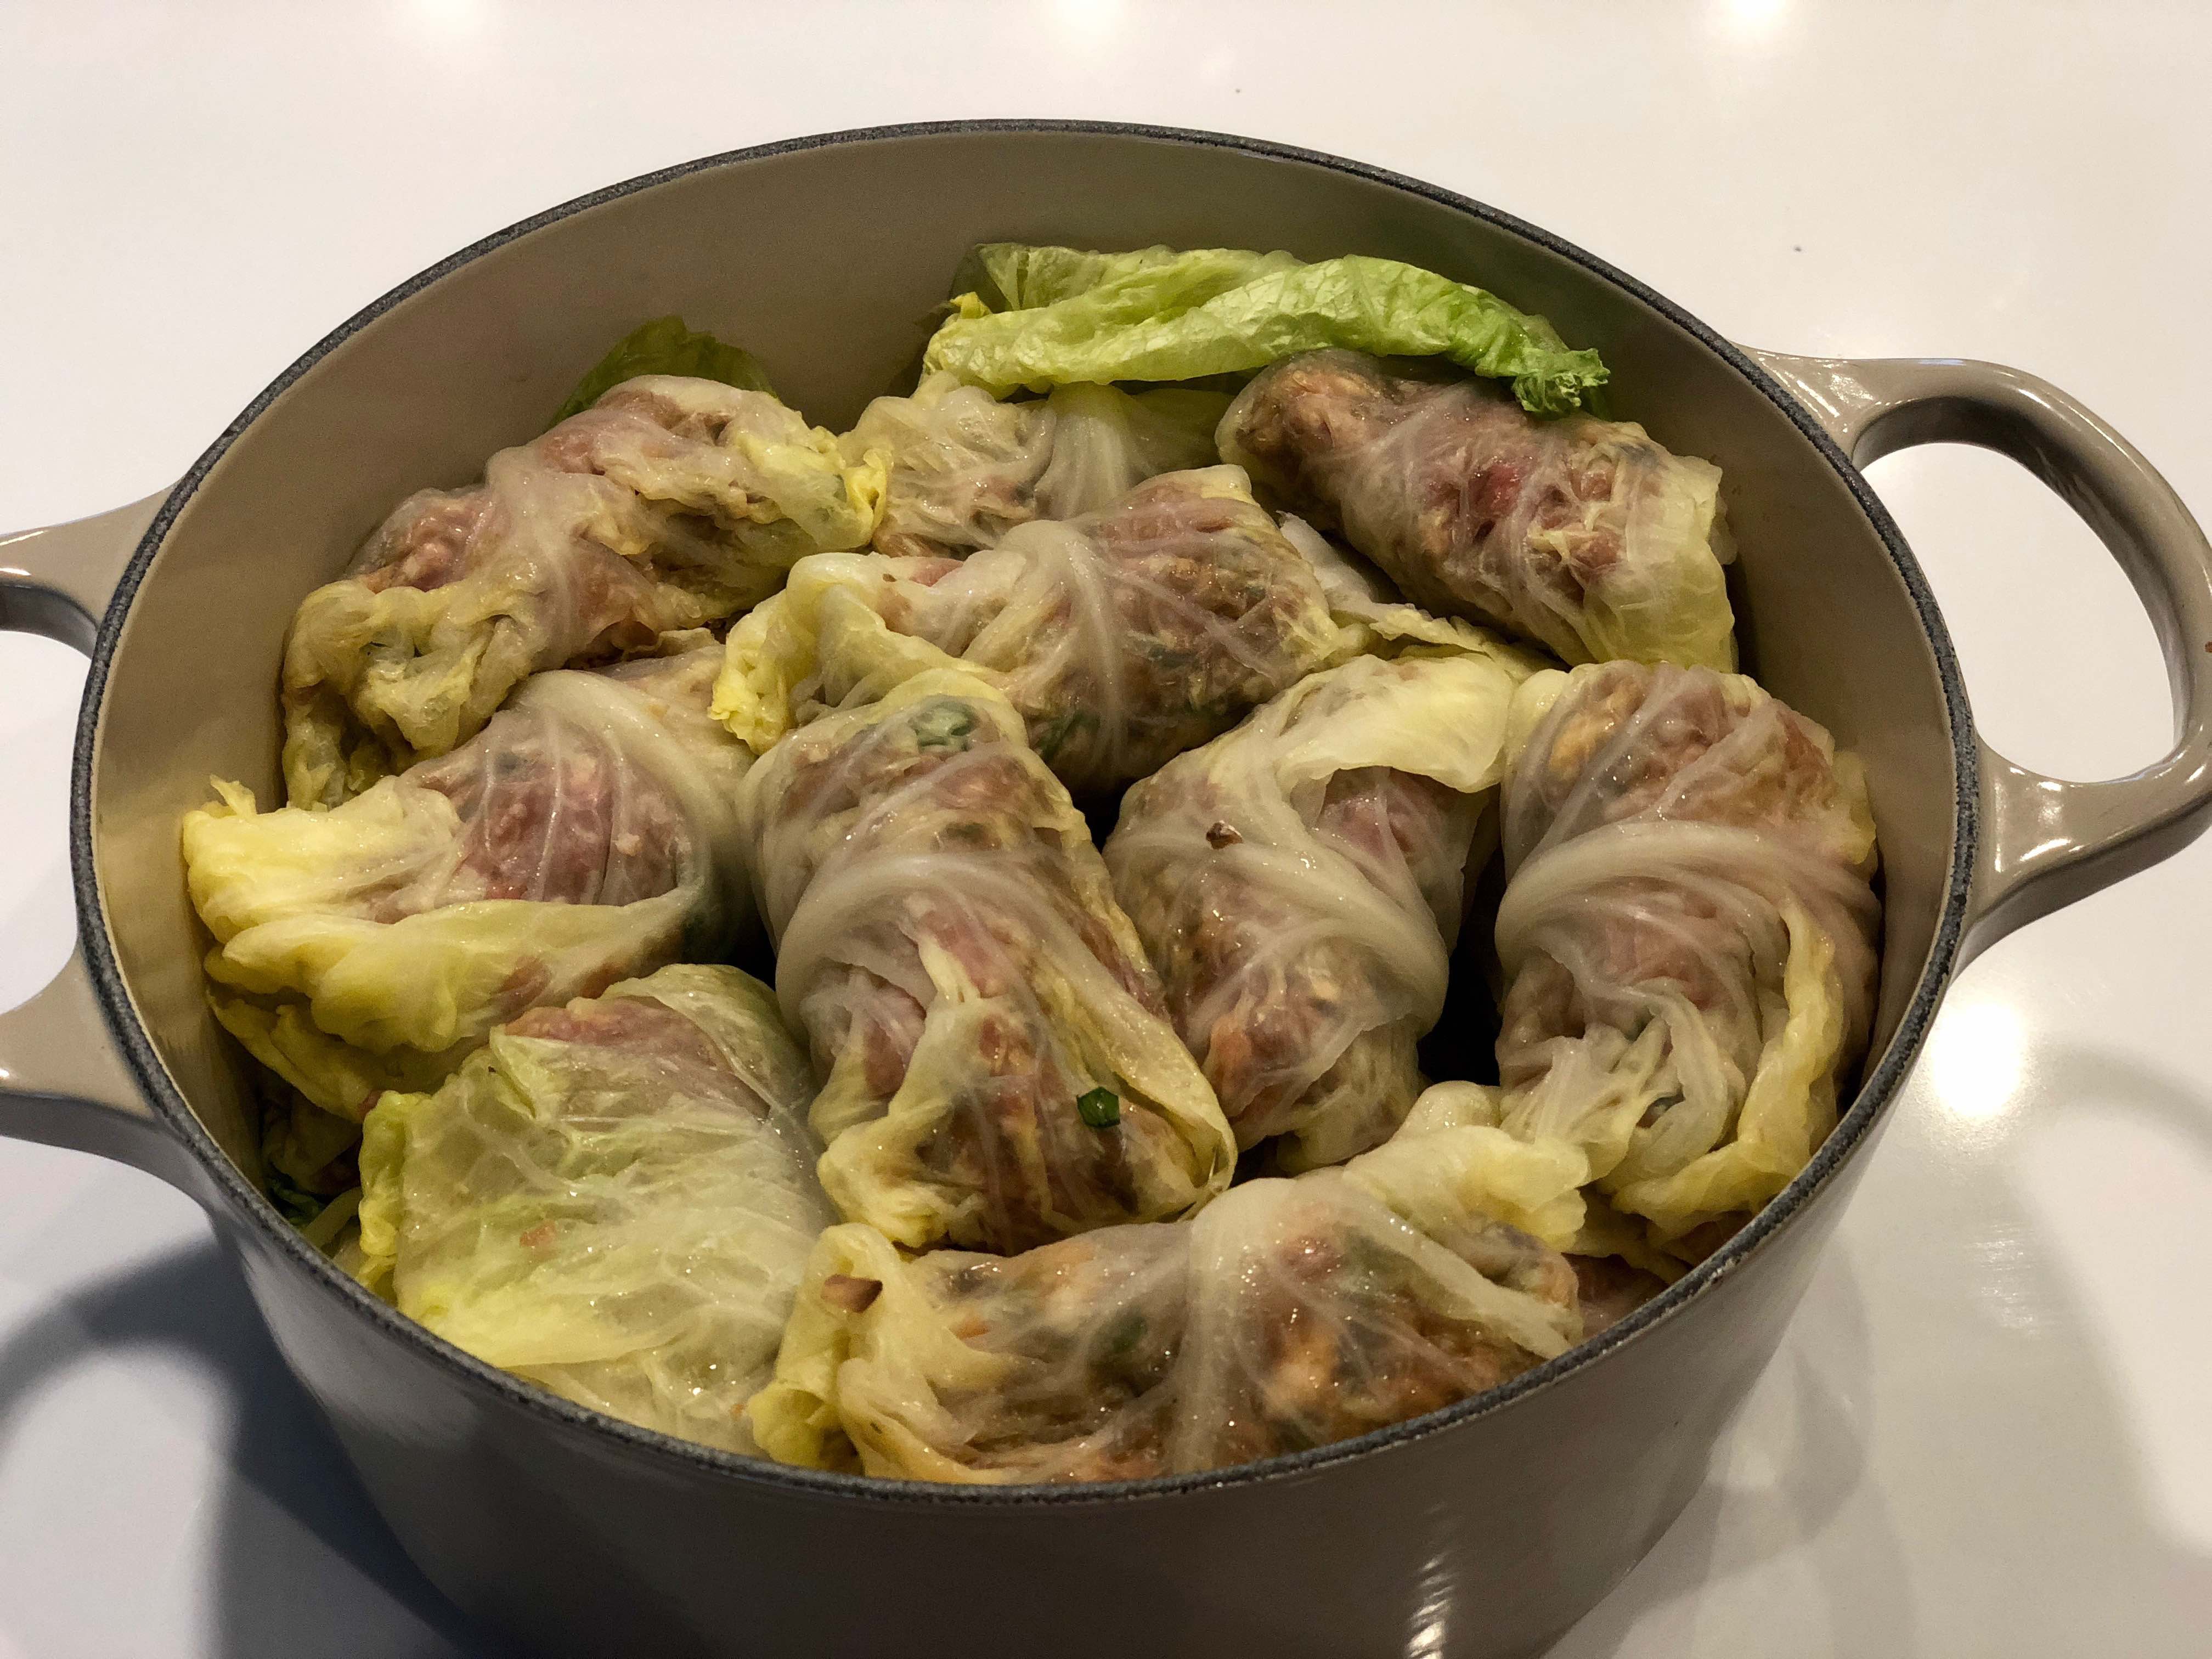 Mouthwatering stuffed cabbage roll recipe with a luscious sweet and sour sauce. It bakes in one pot so cleanup is a breeze. | grownupdish.com